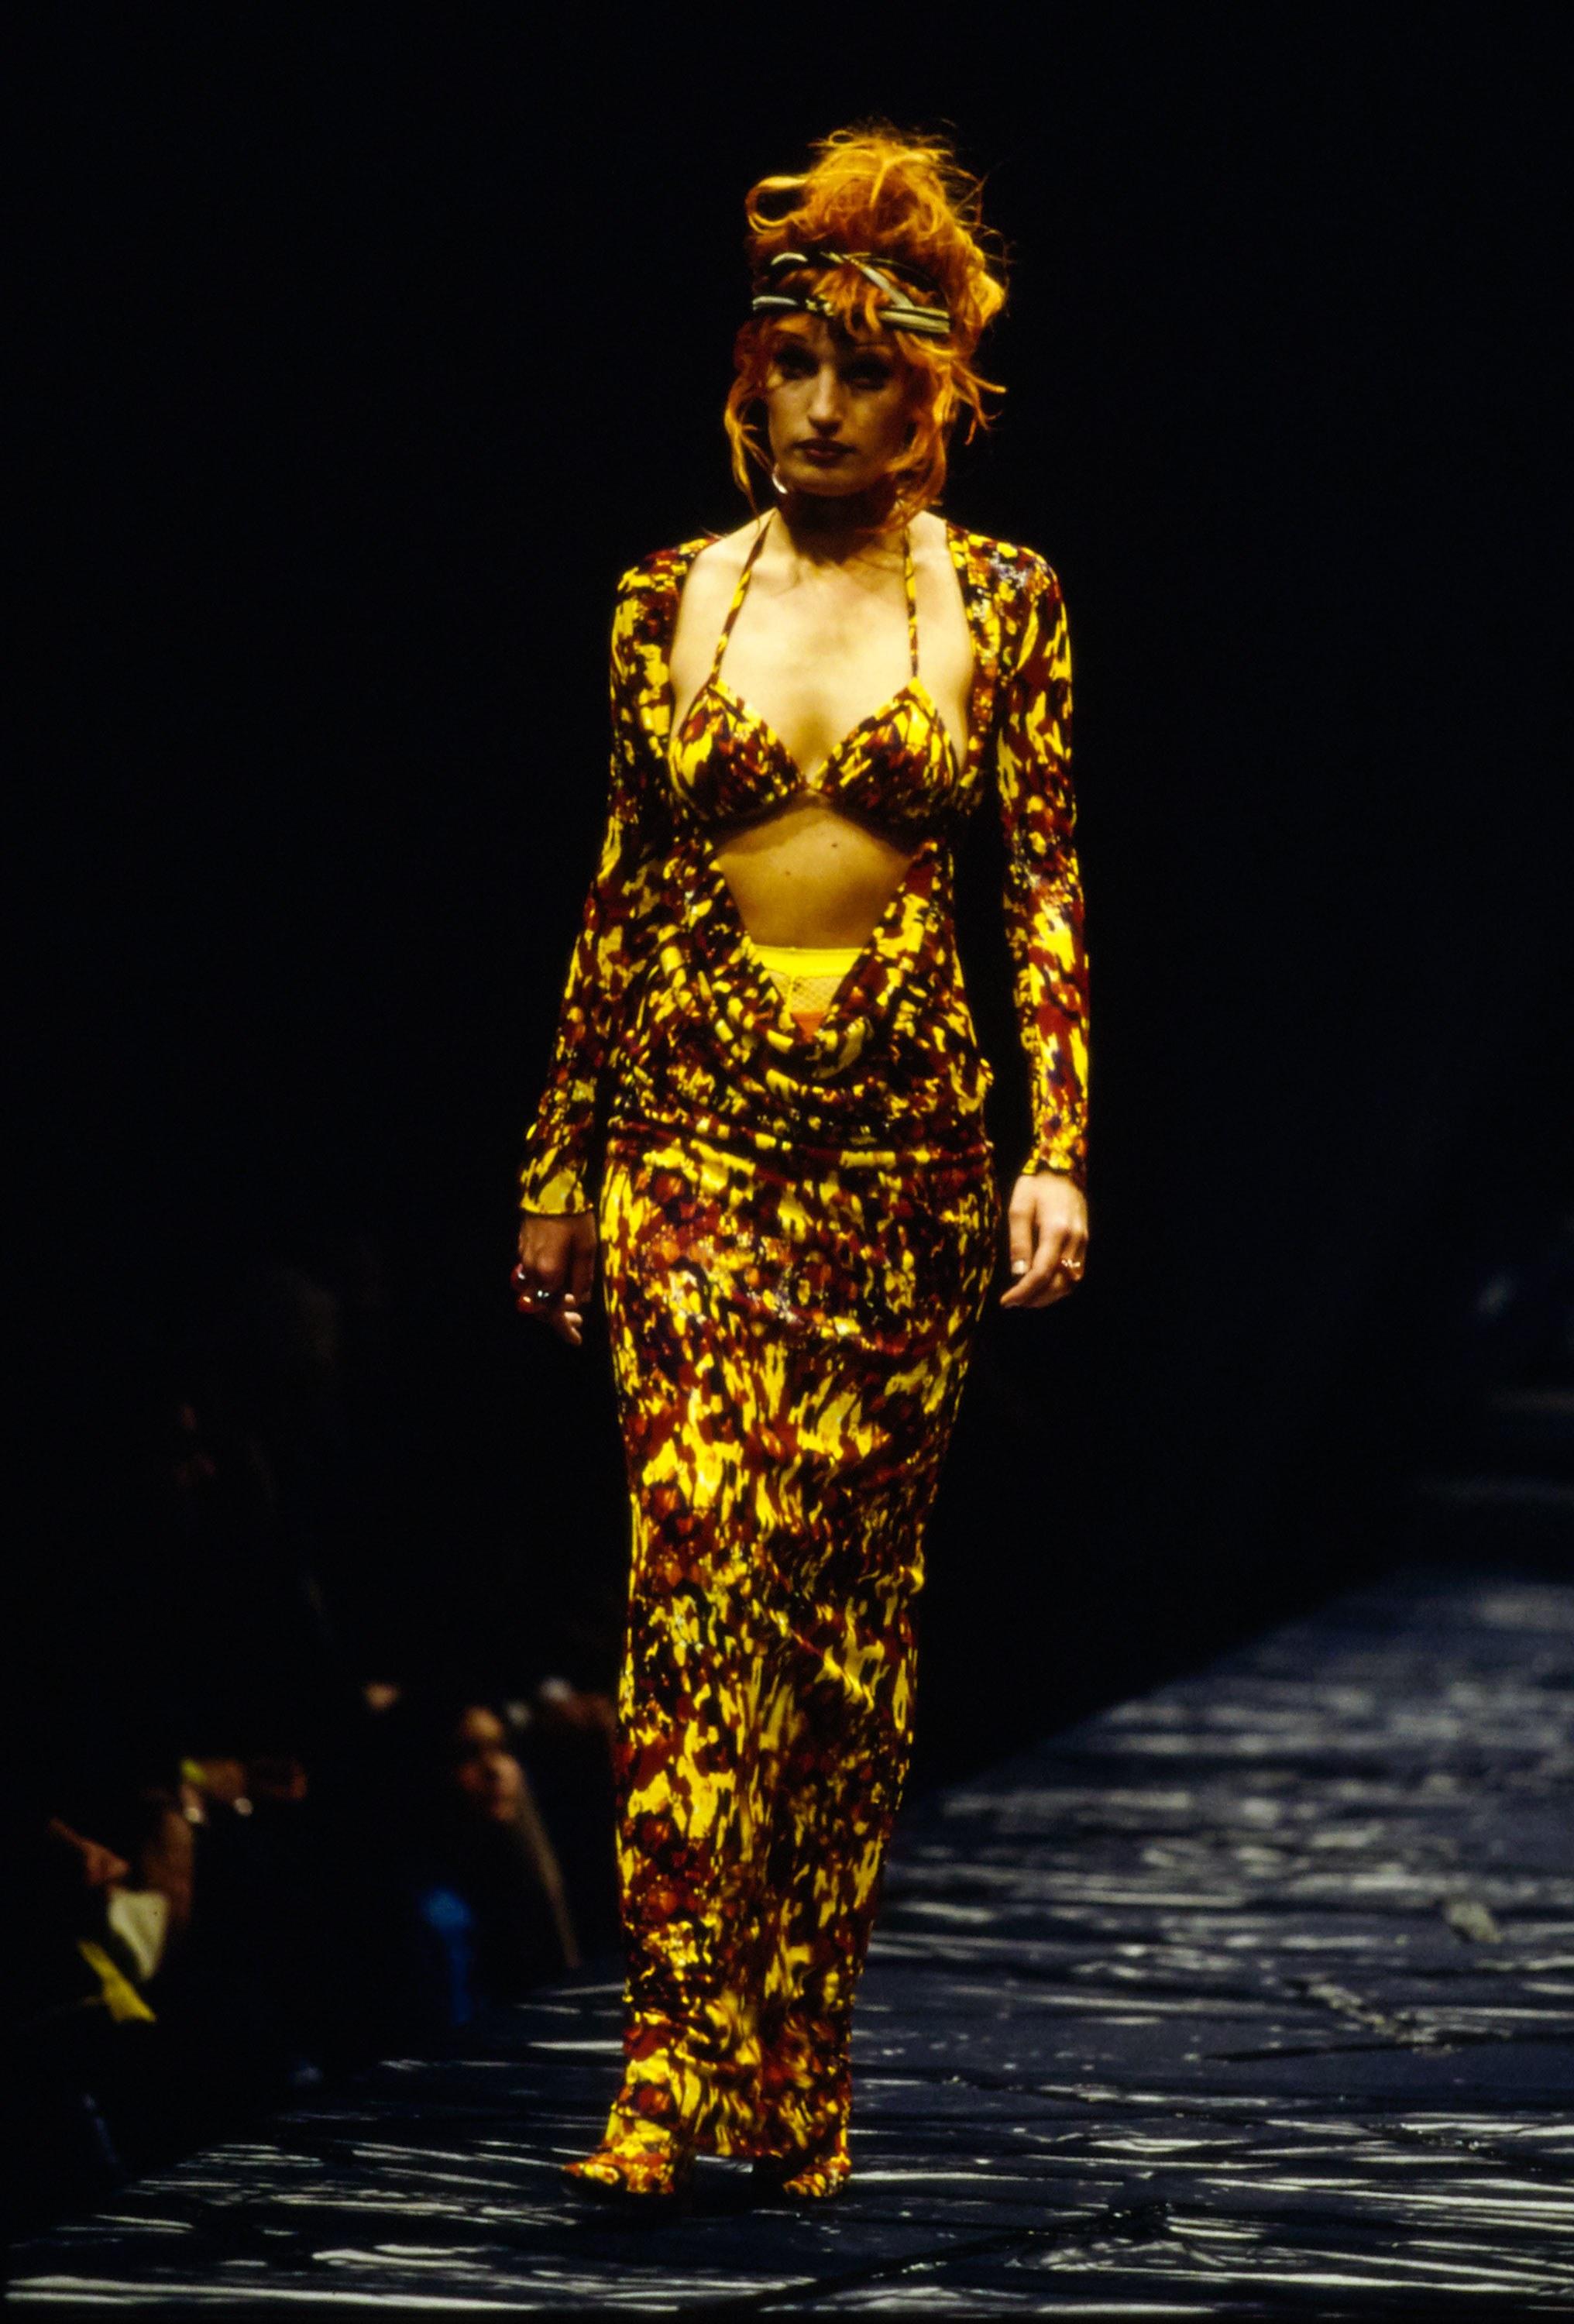 Jean Paul Gaultier tortoise shell print evening dress with open front and matching bra.

Spring-Summer 1997